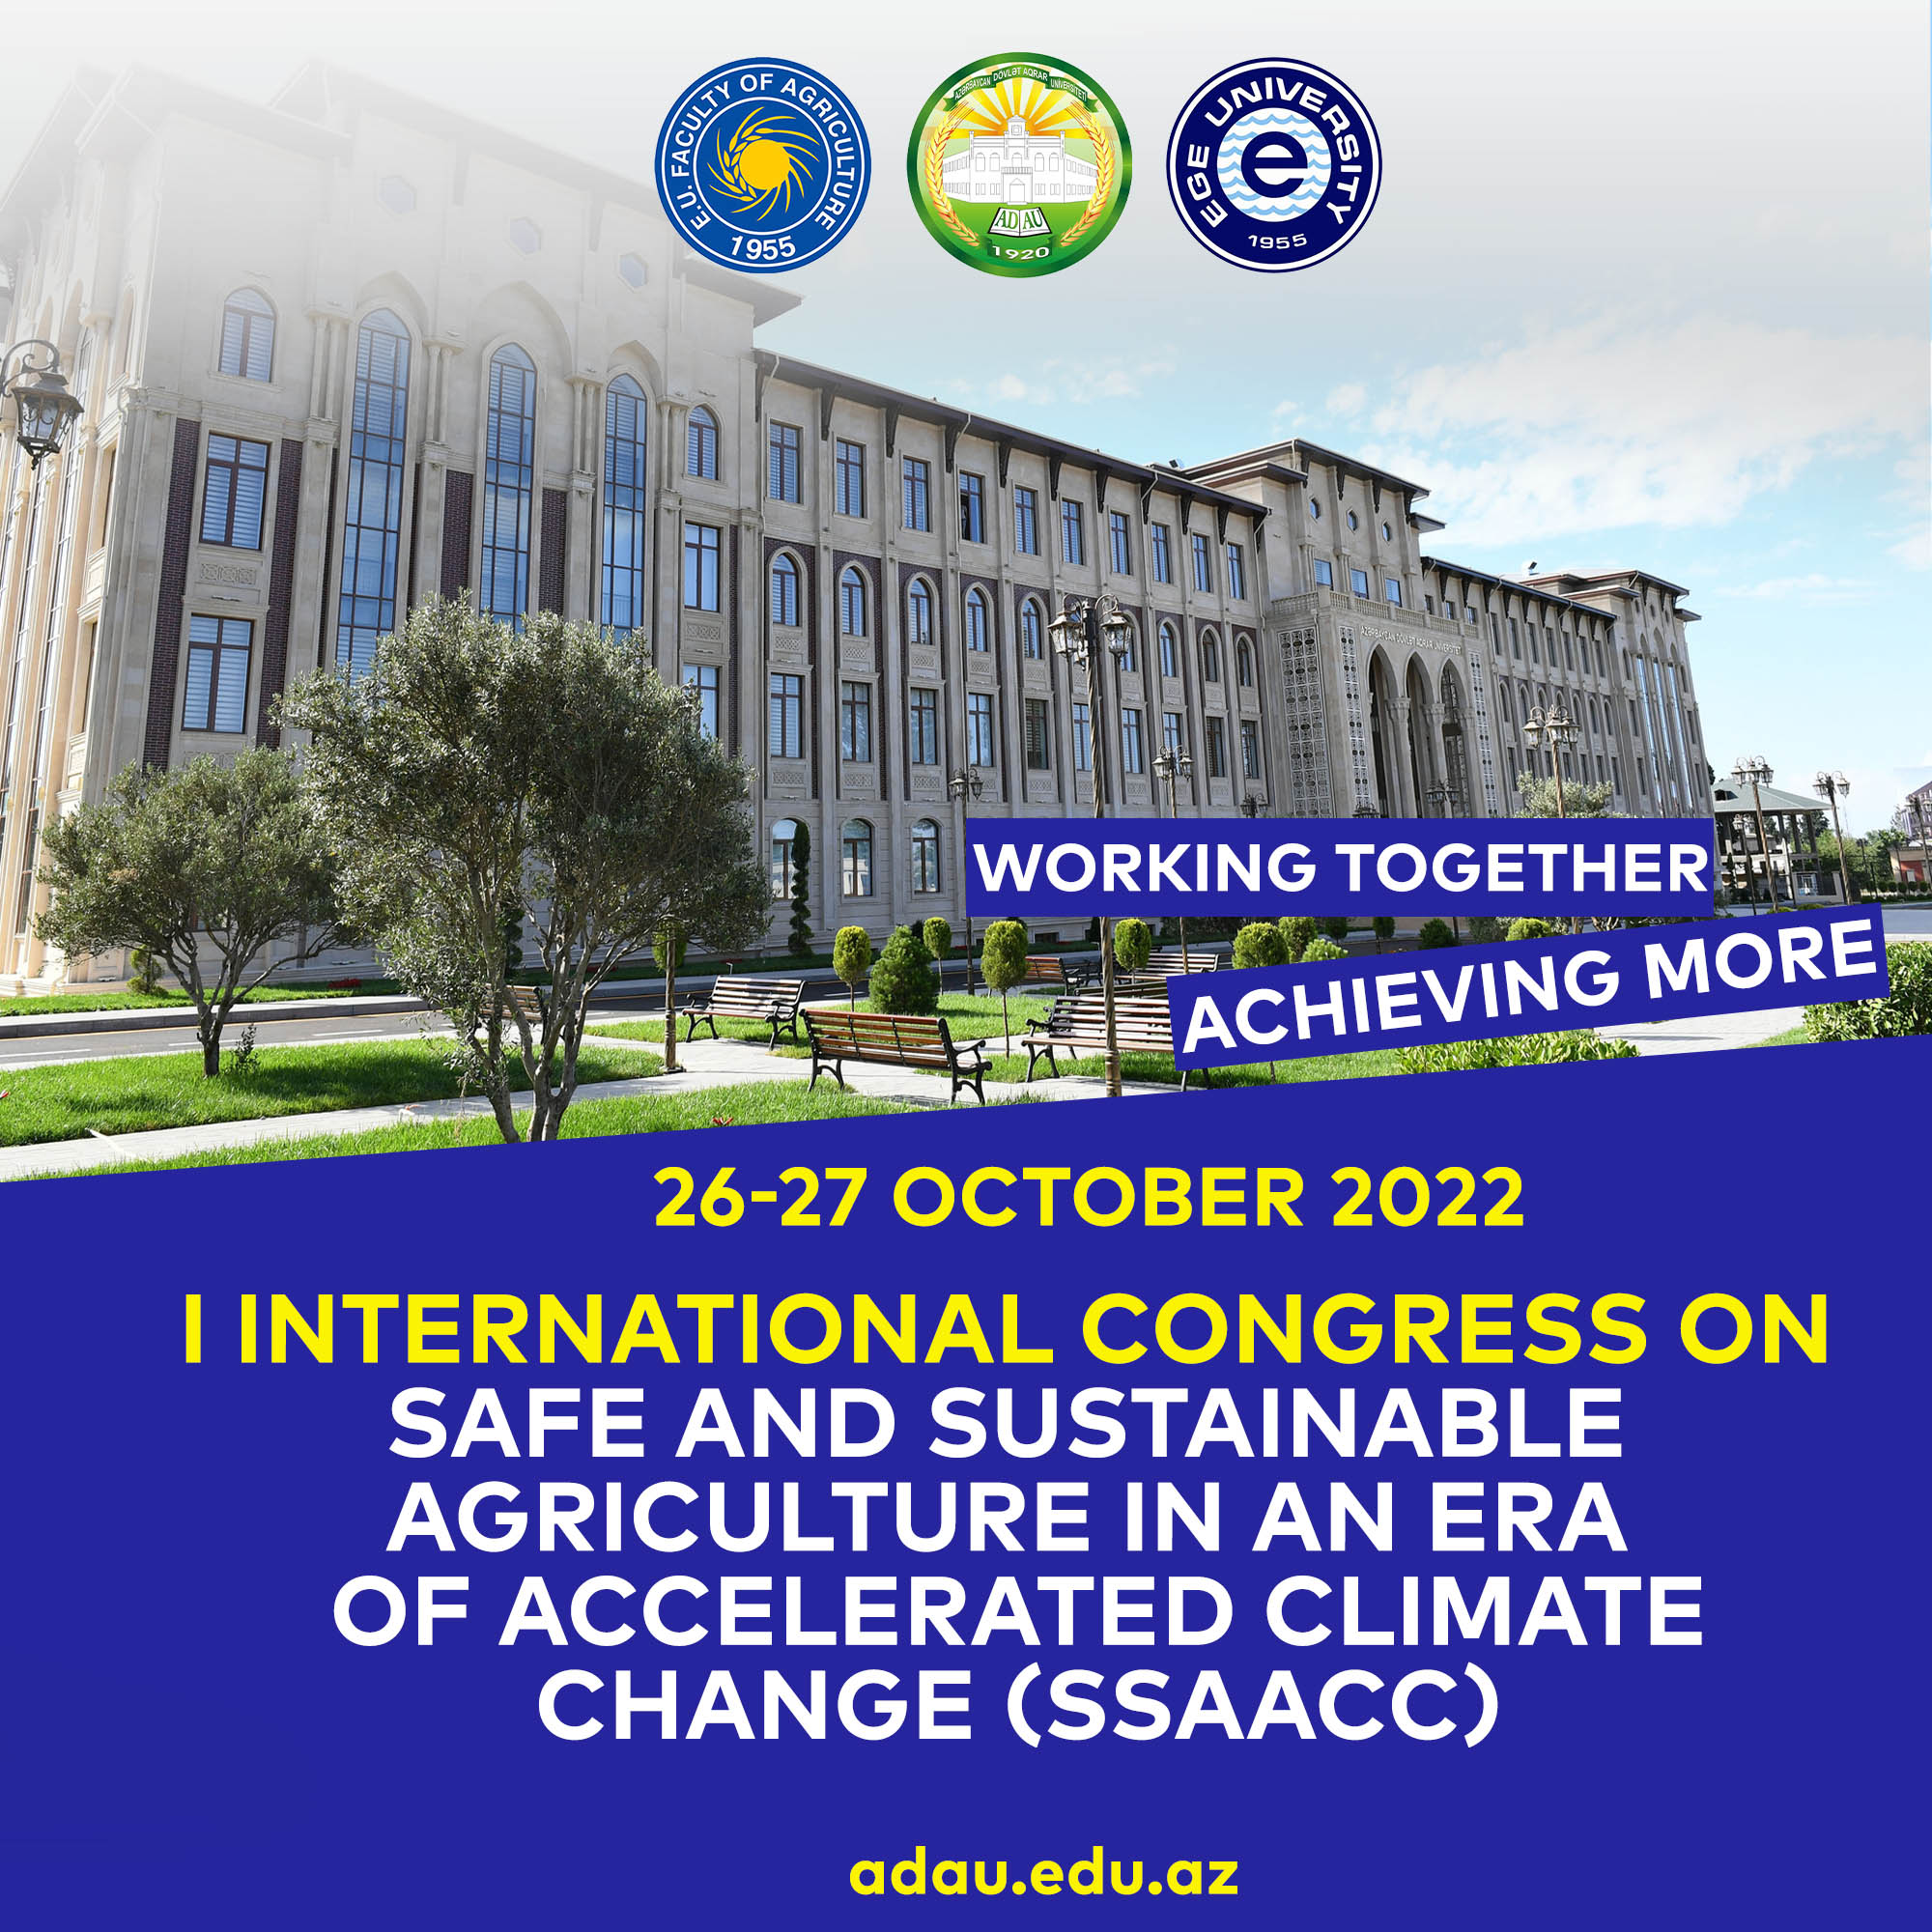 I INTERNATIONAL CONGRESS ON SAFE AND SUSTAINABLE AGRICULTURE IN AN ERA OF ACCELERATED CLIMATE CHANGE (SSAACC)  26-27 OCTOBER, 2022